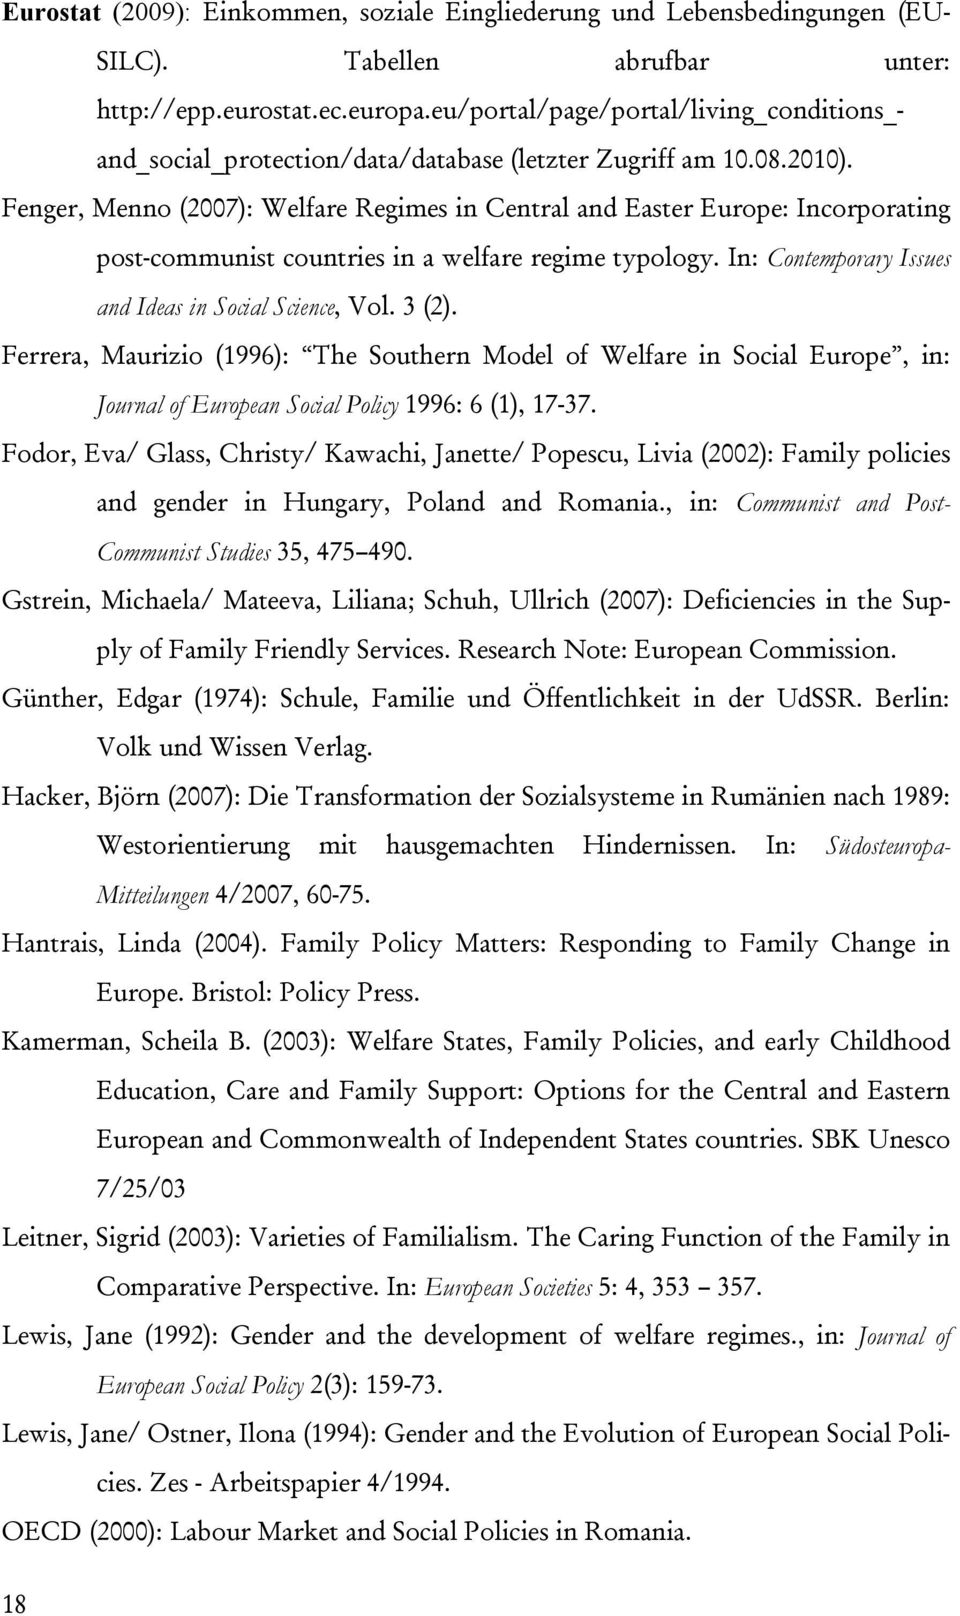 Fenger, Menno (2007): Welfare Regimes in Central and Easter Europe: Incorporating post-communist countries in a welfare regime typology. In: Contemporary Issues and Ideas in Social Science, Vol.